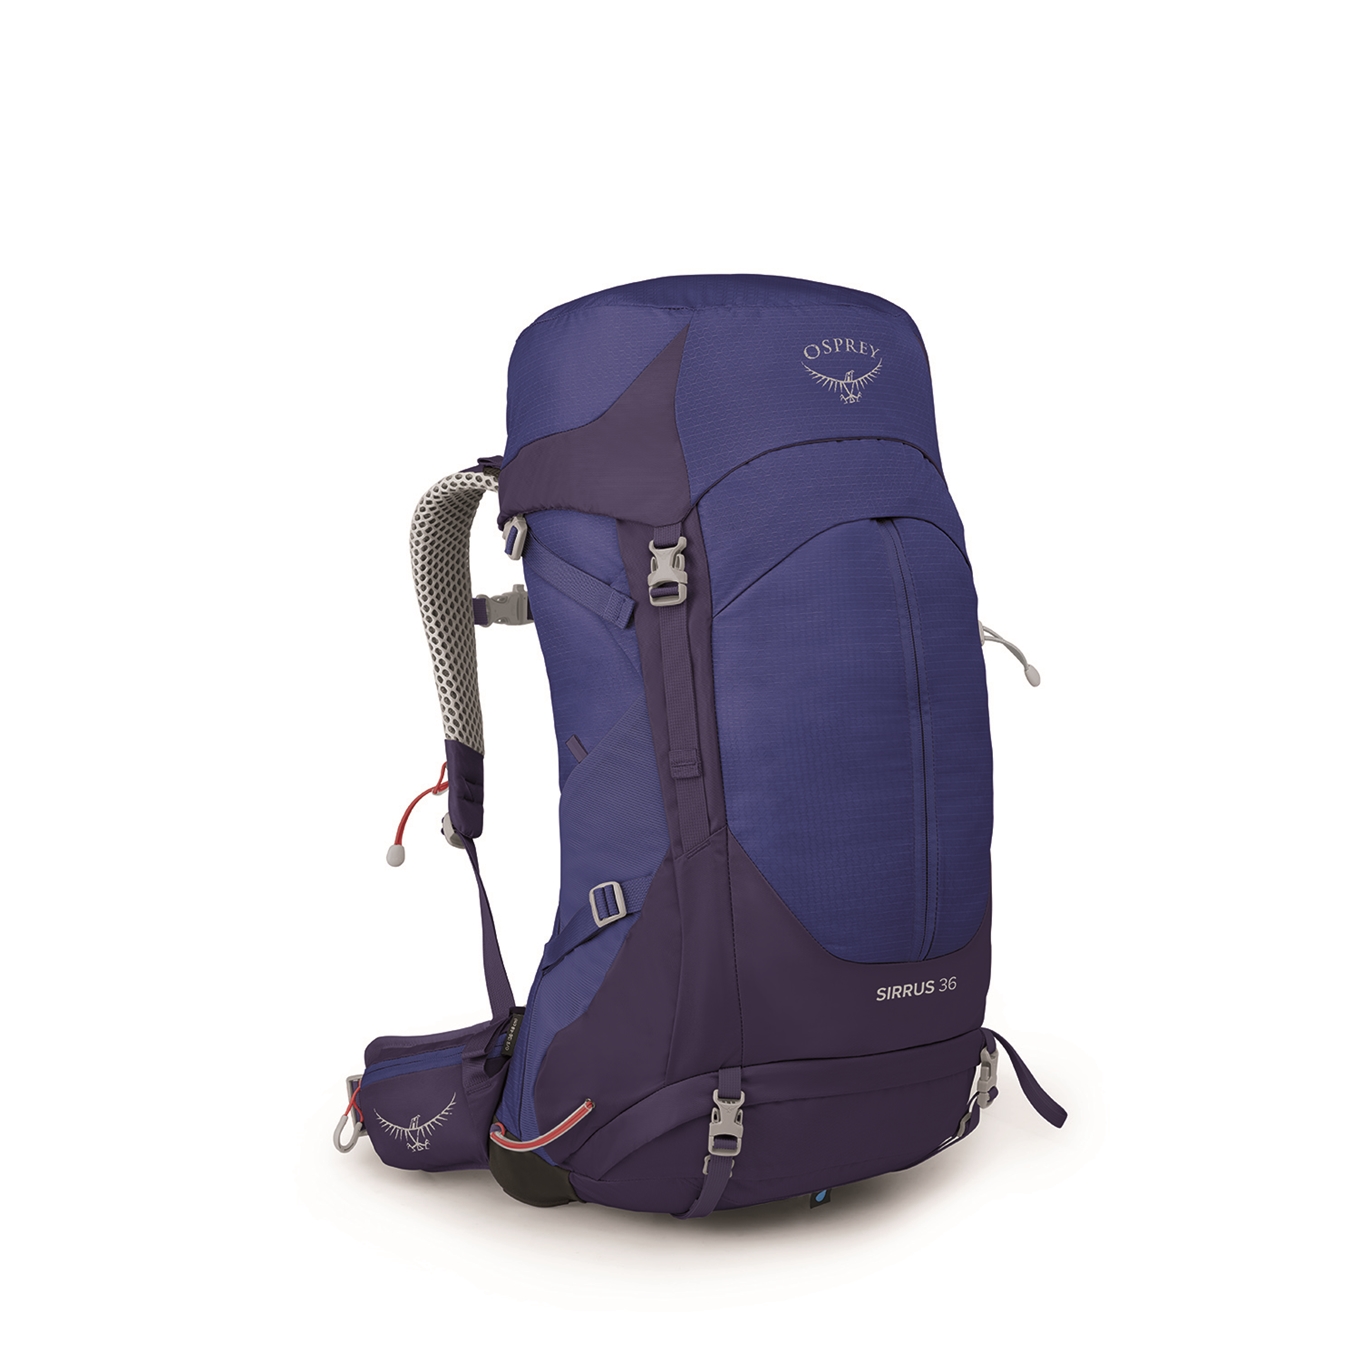 autobiografie Vrijlating Ooit Osprey Sirrus 36 Backpack blueberry | Travelbags.nl